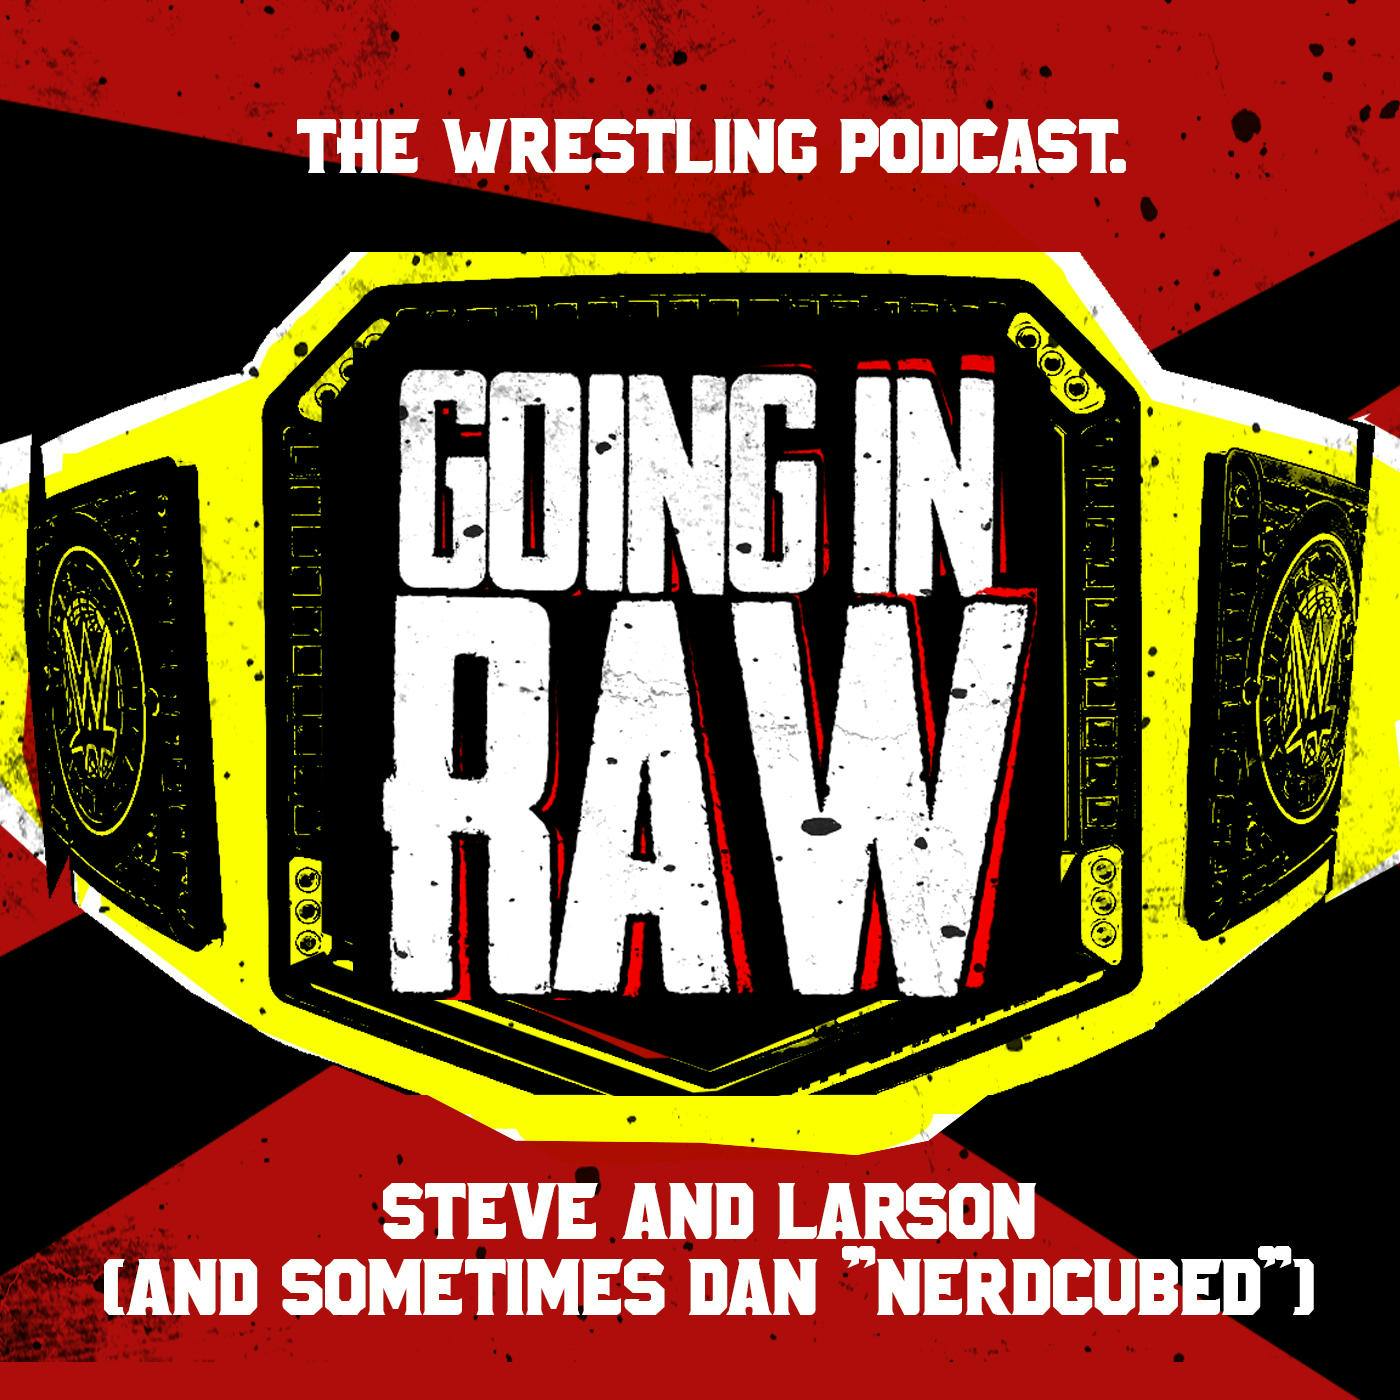 BAYLEY HEEL TURN COMING? REY TO NJPW! GRONK TO WWE? (Going in Raw Pro Wrestling Podcast)